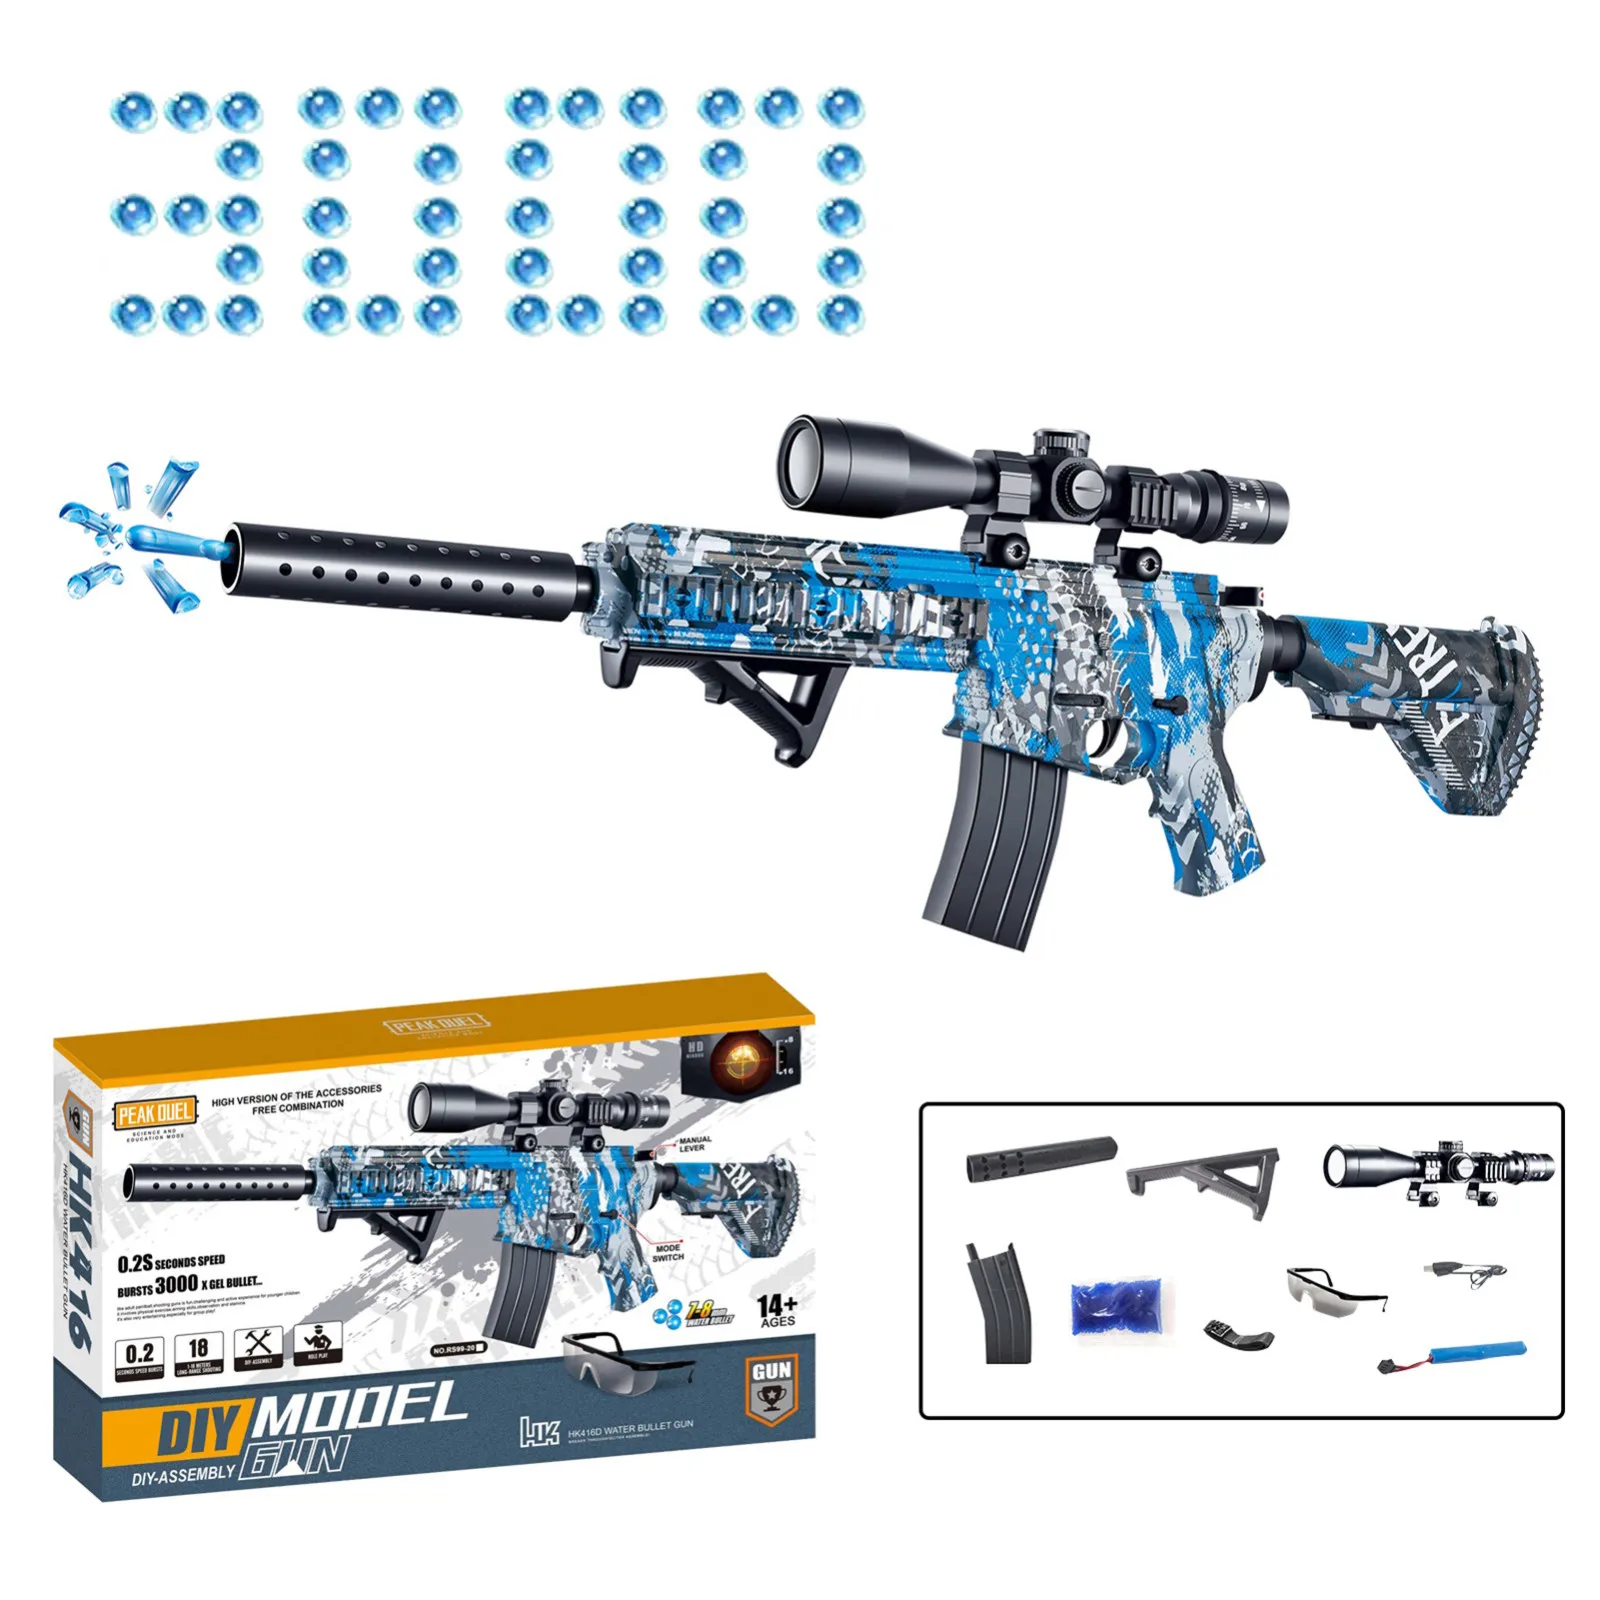 

M416 Electric Toy With Gel Ball Blaster Toy Guns For Boys With Water Bullet Plastic Weapon Model Birthday Gift Paintball Airsoft